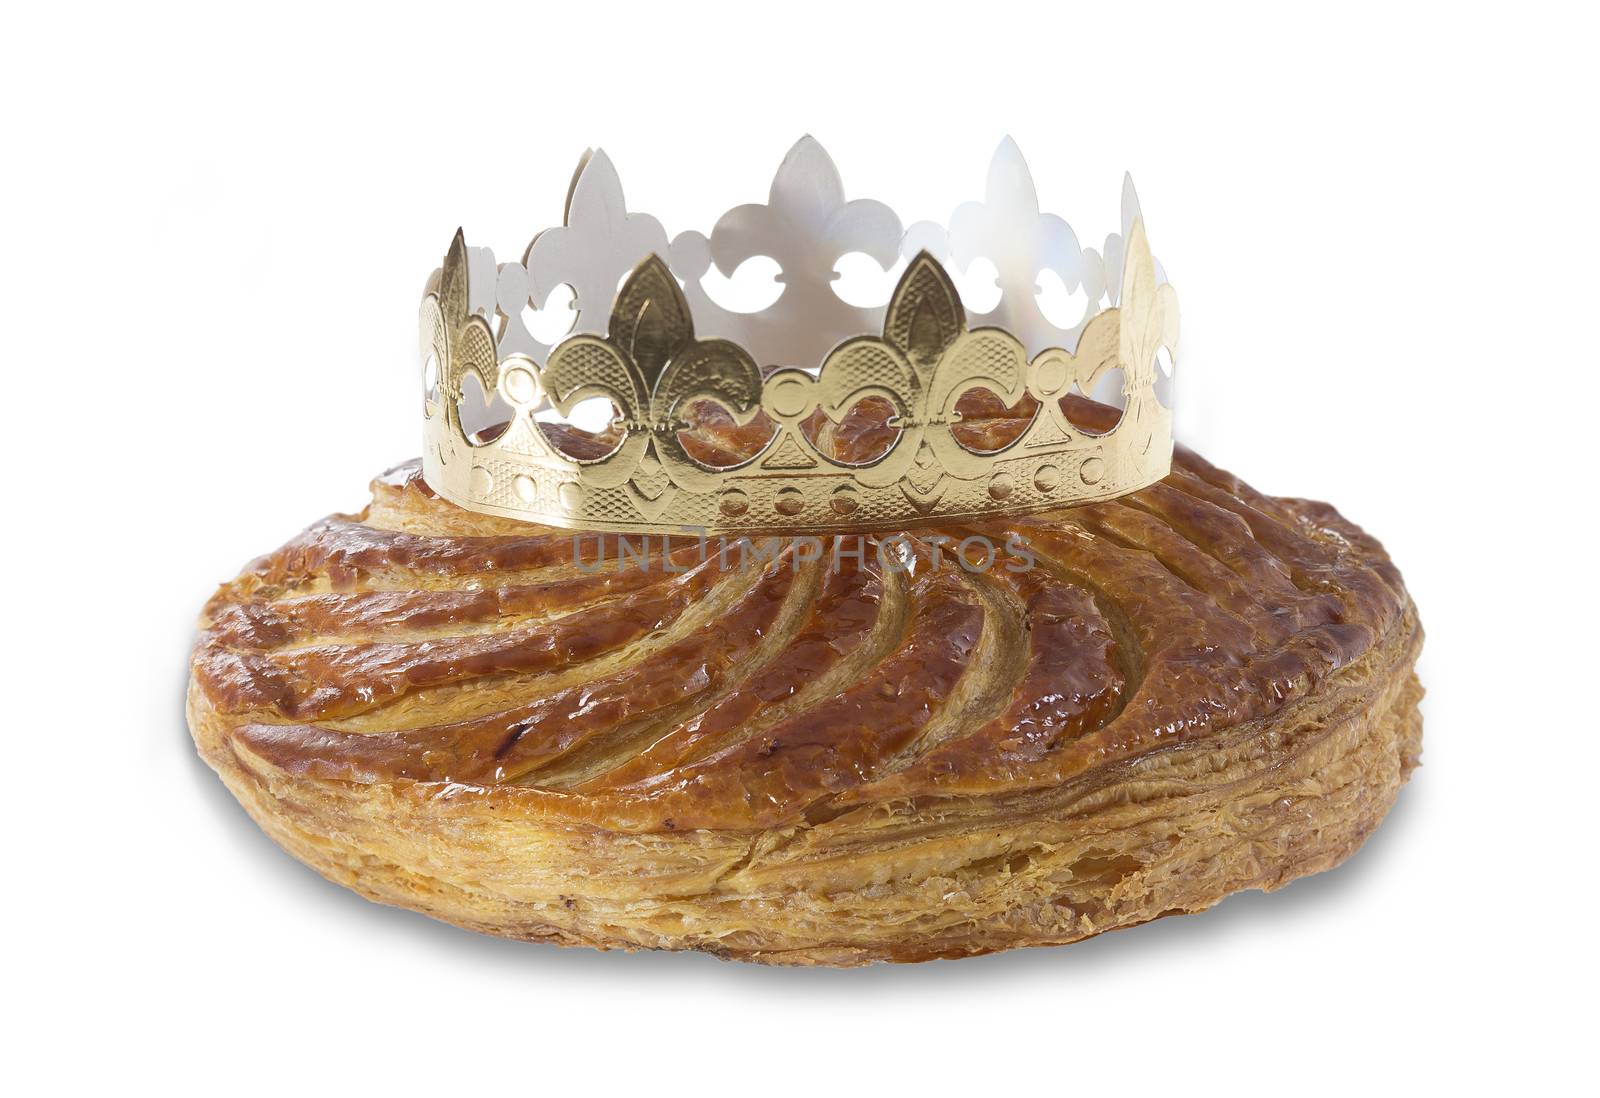 epiphany cakegalette des rois , king cake with crown by JPC-PROD